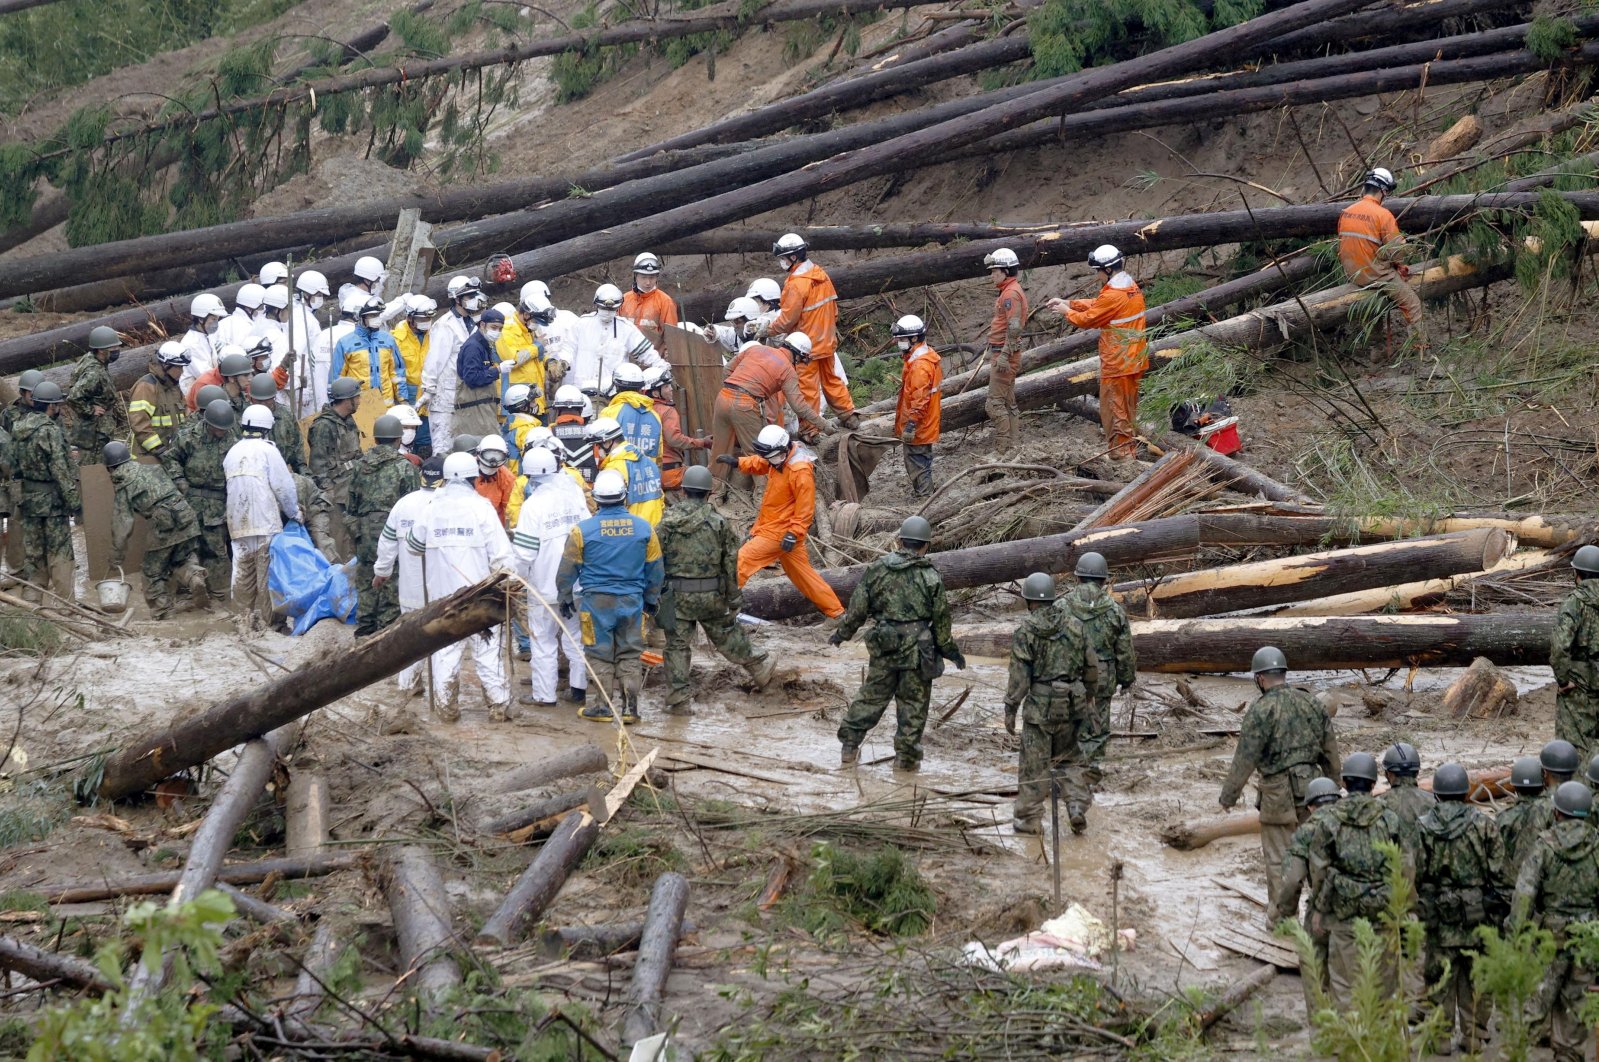 Rescue workers and Japanese troops conduct a search and rescue operation, Mimata, Japan, Sept. 19, 2022.